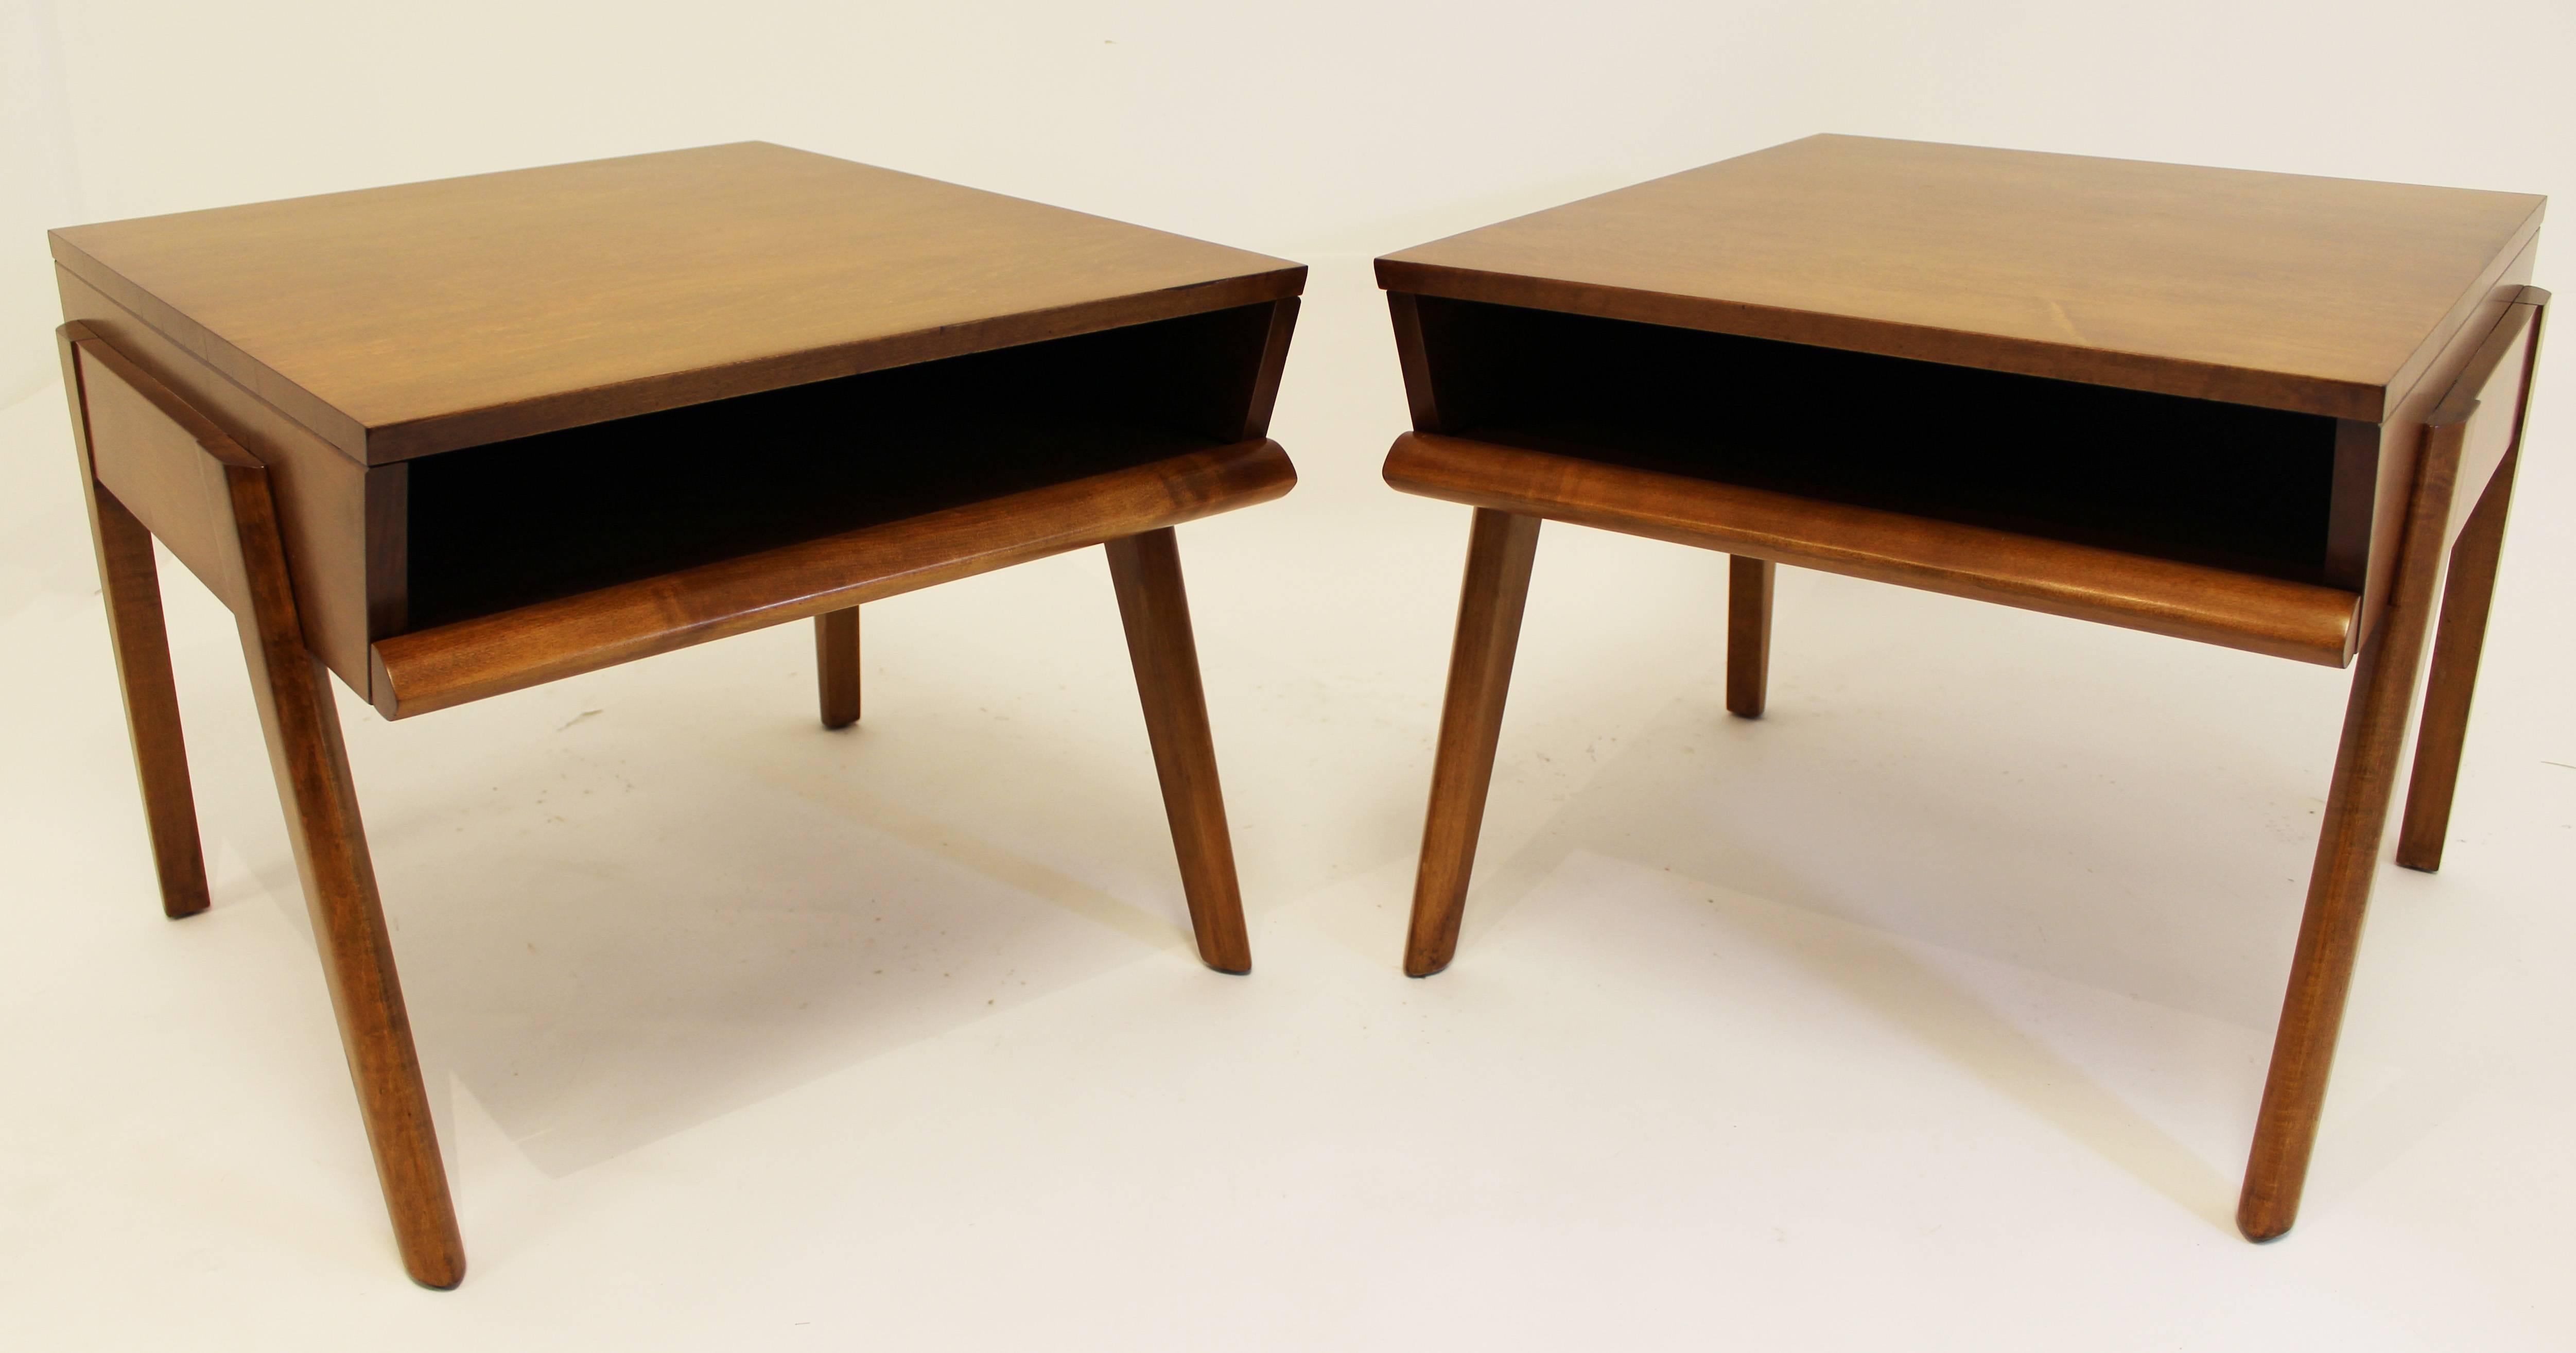 North American John Keal for Brown Saltman Pair of End Tables and Coffee Table